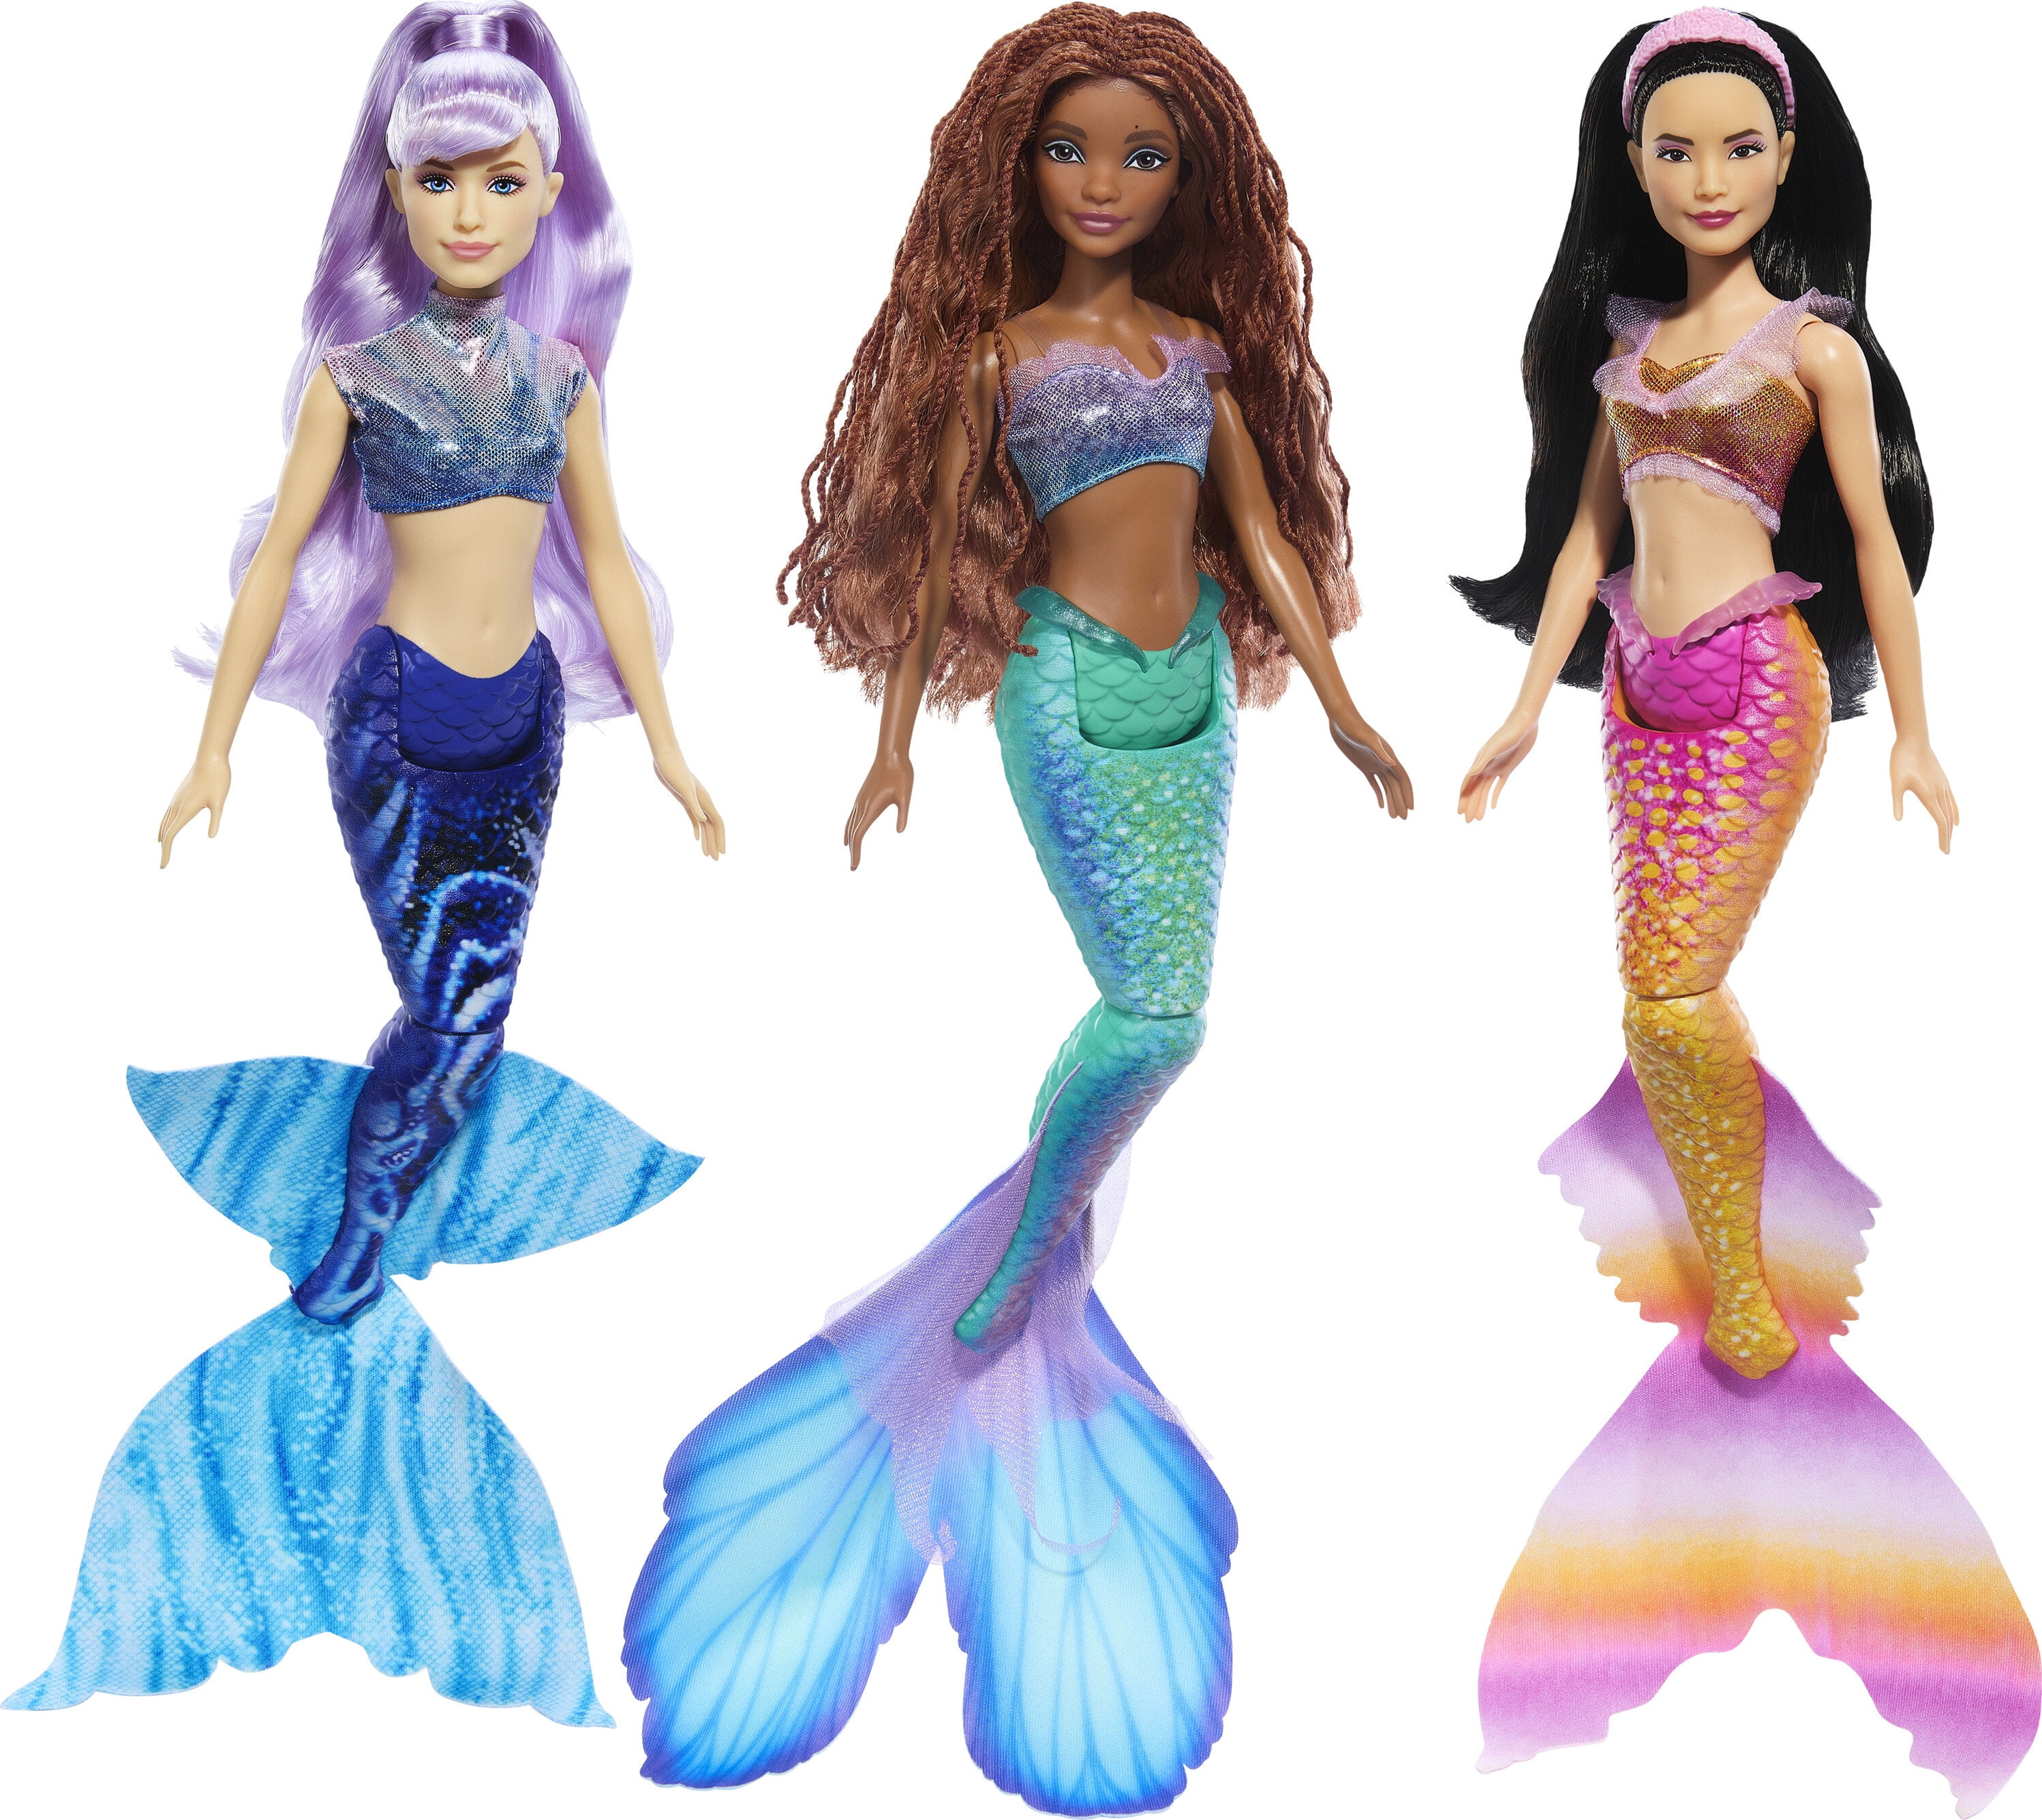  Mattel Disney the Little Mermaid Ariel Doll, Mermaid Fashion  Doll with Signature Outfit, Toys Inspired by Disney's the Little Mermaid :  Toys & Games